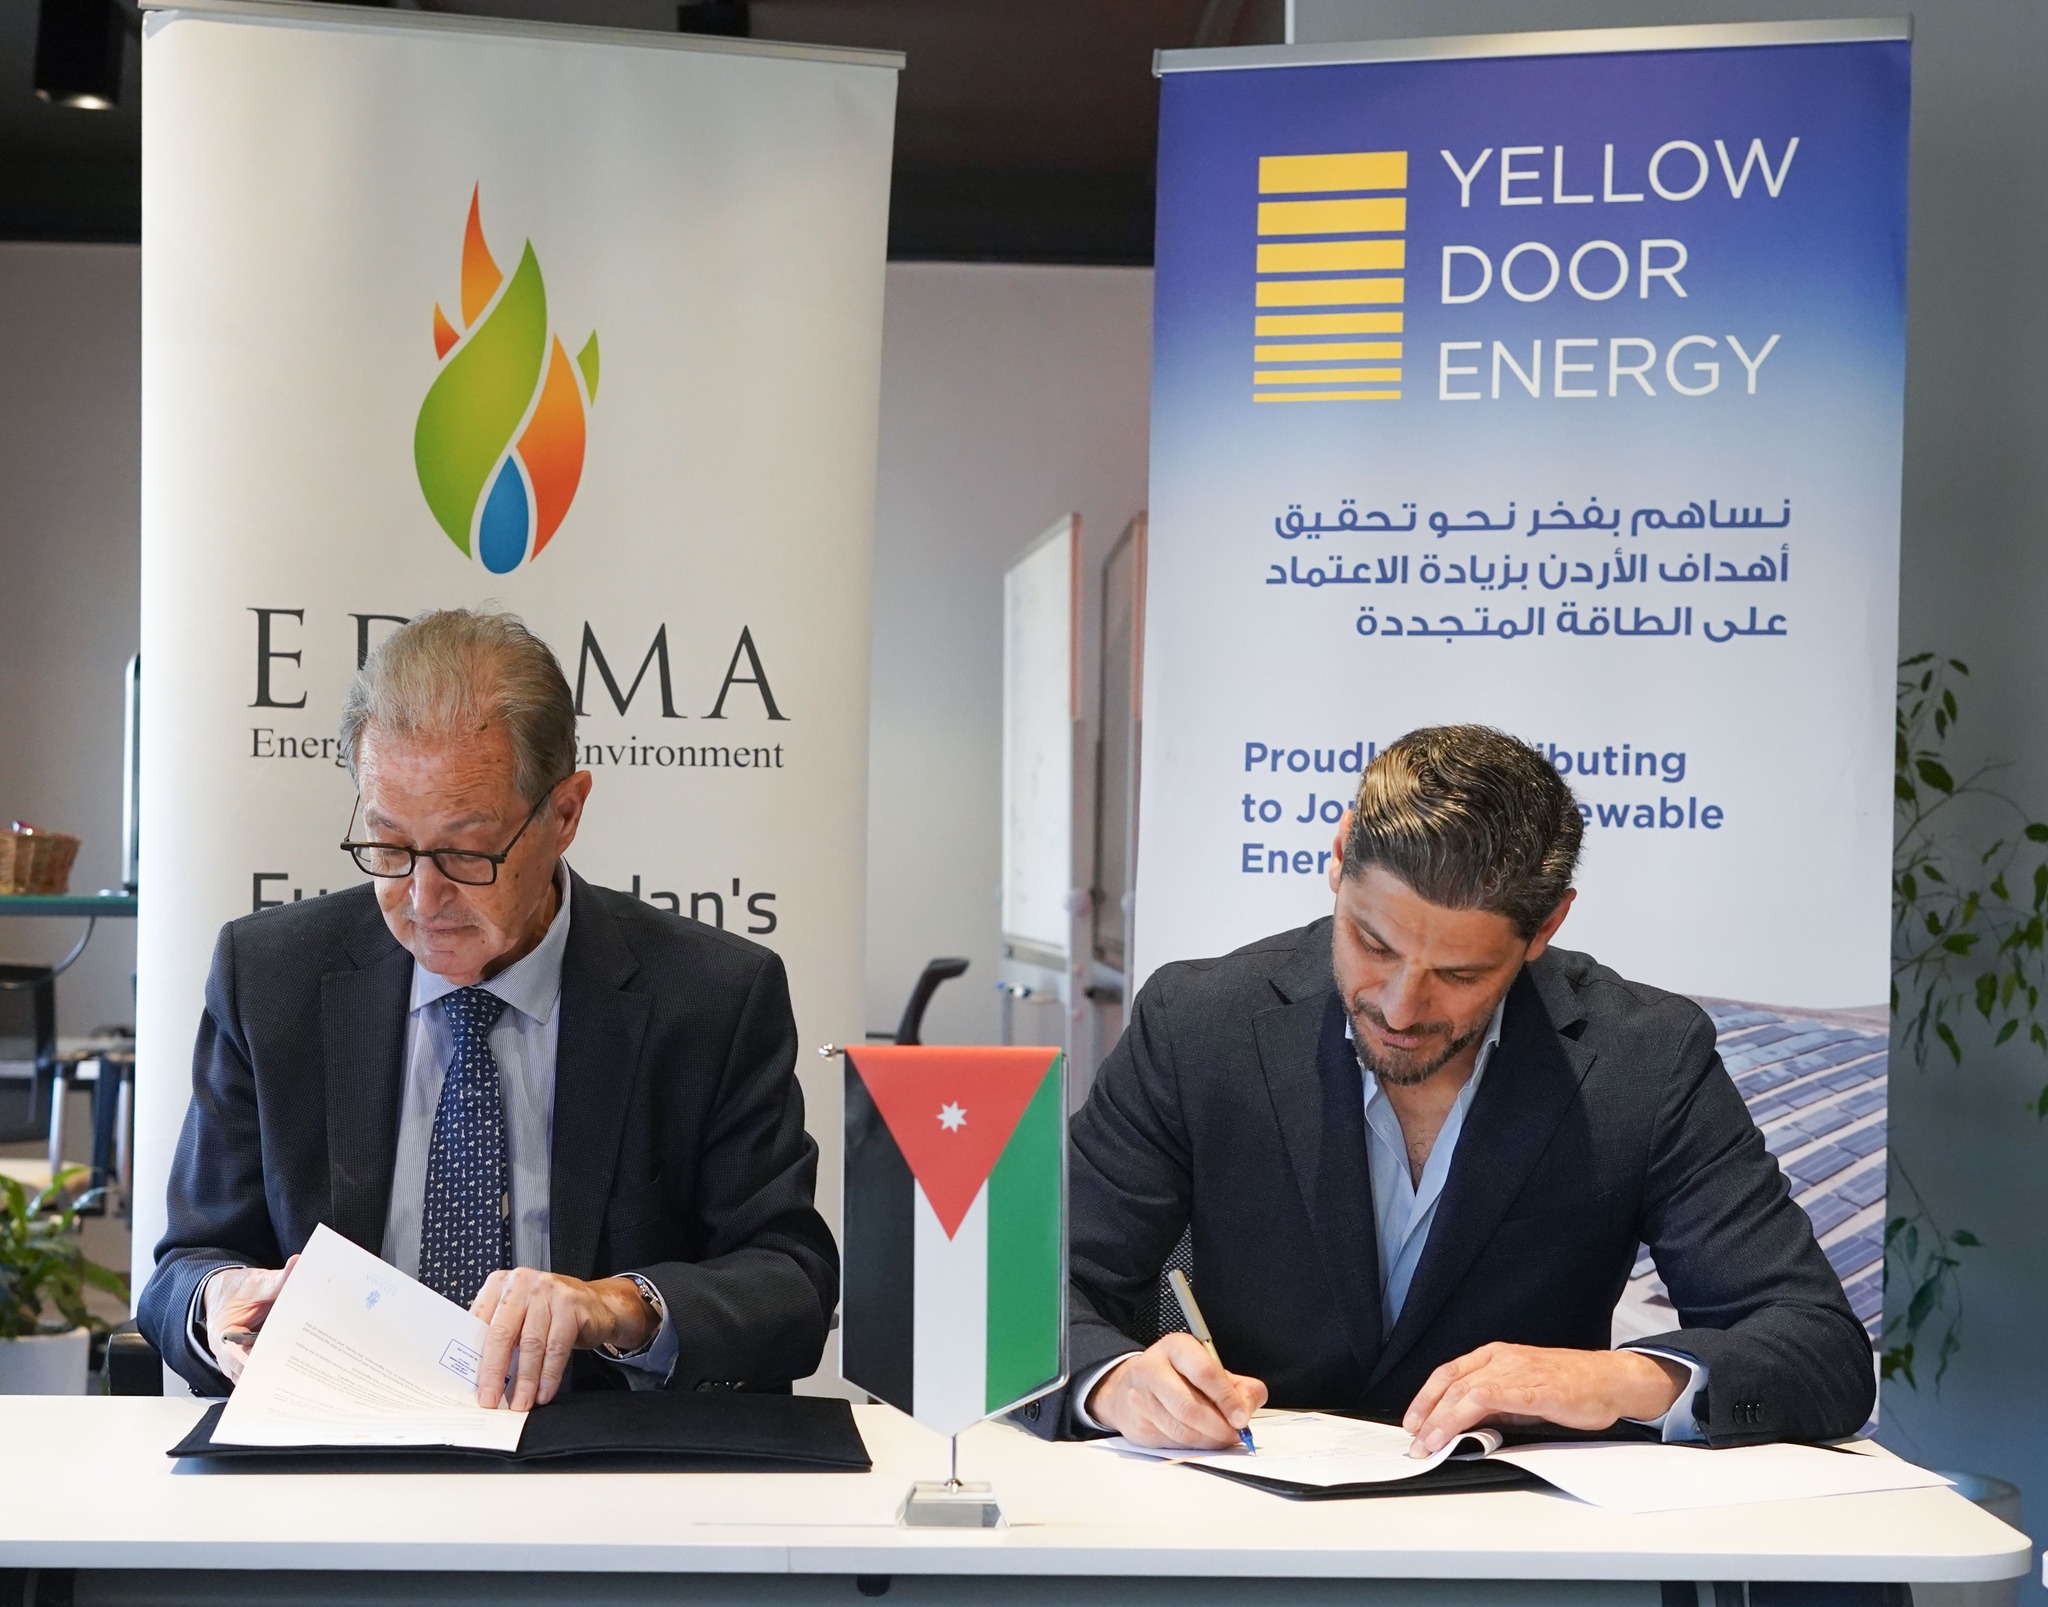 EDAMA and Yellow Door Energy sign an agreement to provide solar PV training for underprivileged youths in Jordan – EQ Mag